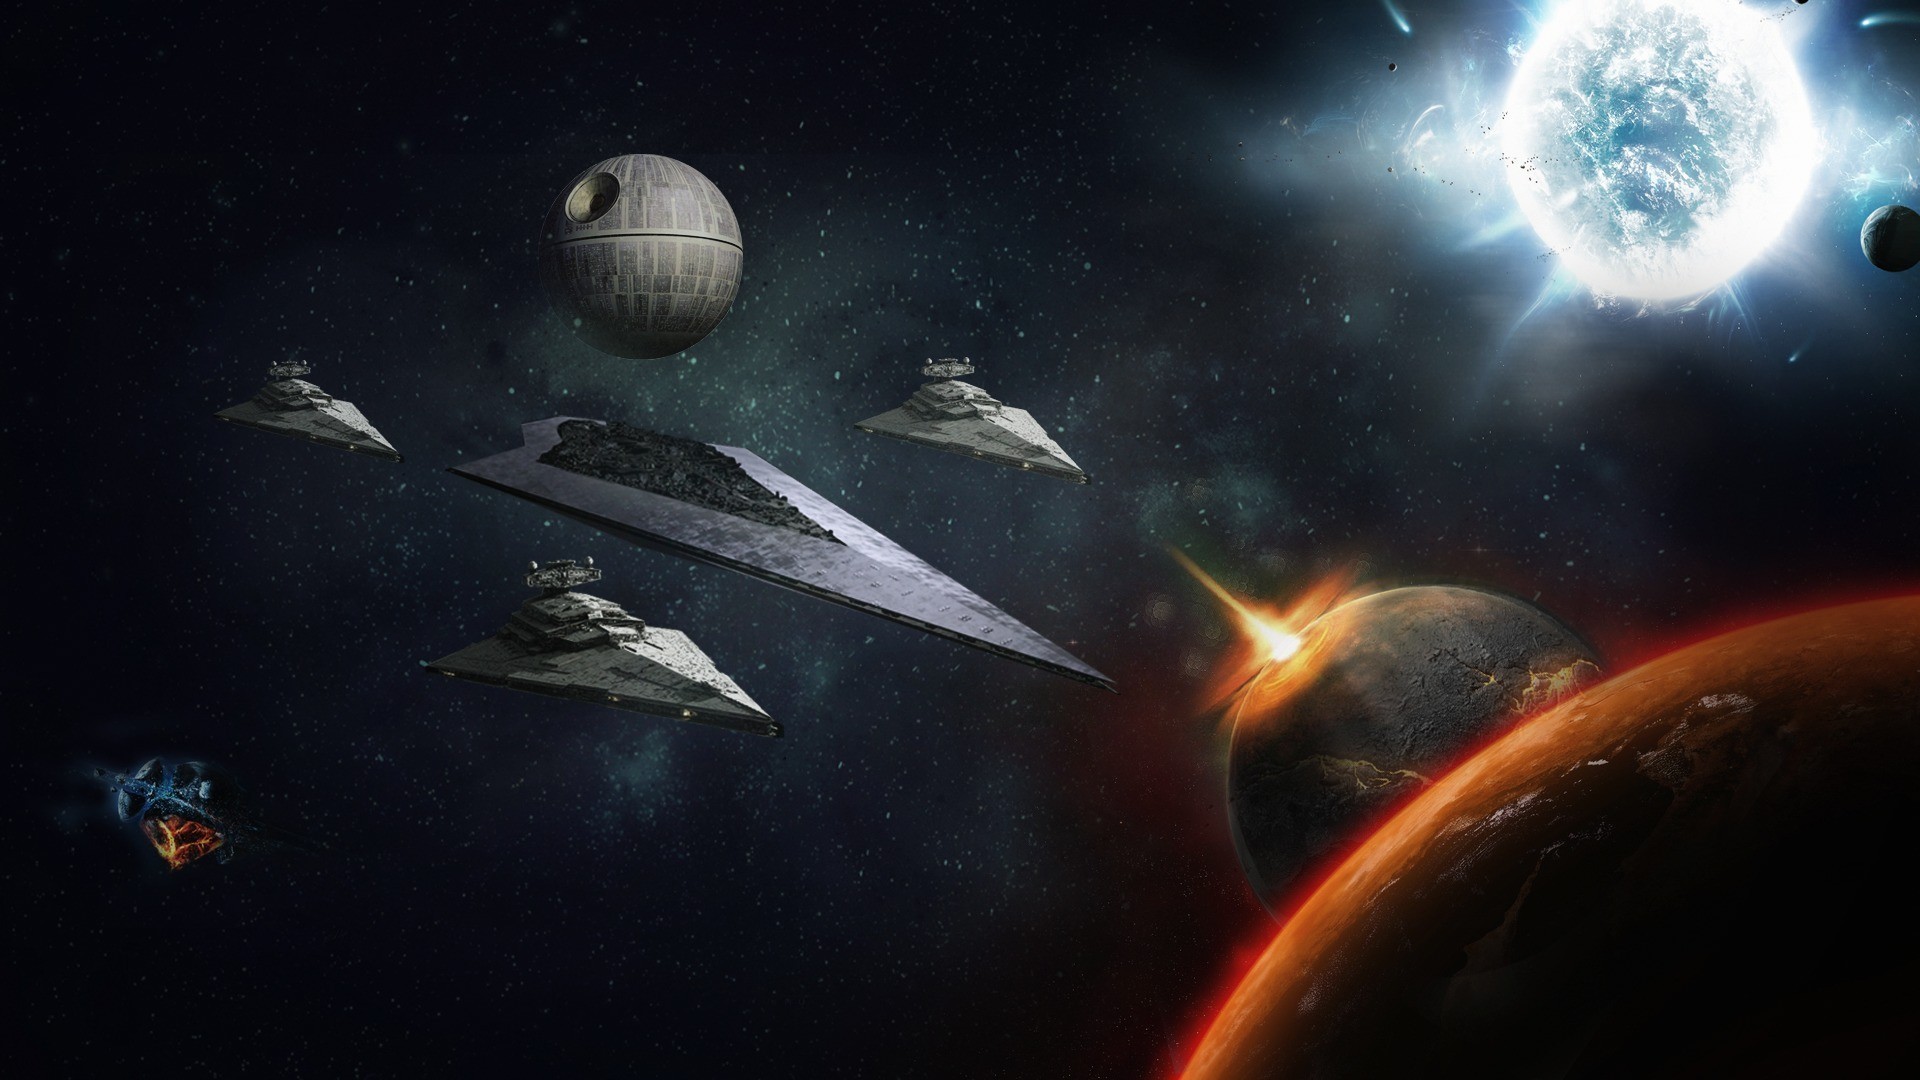 1920x1080 Movie : Backgrounds For Star Wars Art Wallpapers 1080x1920px Star .